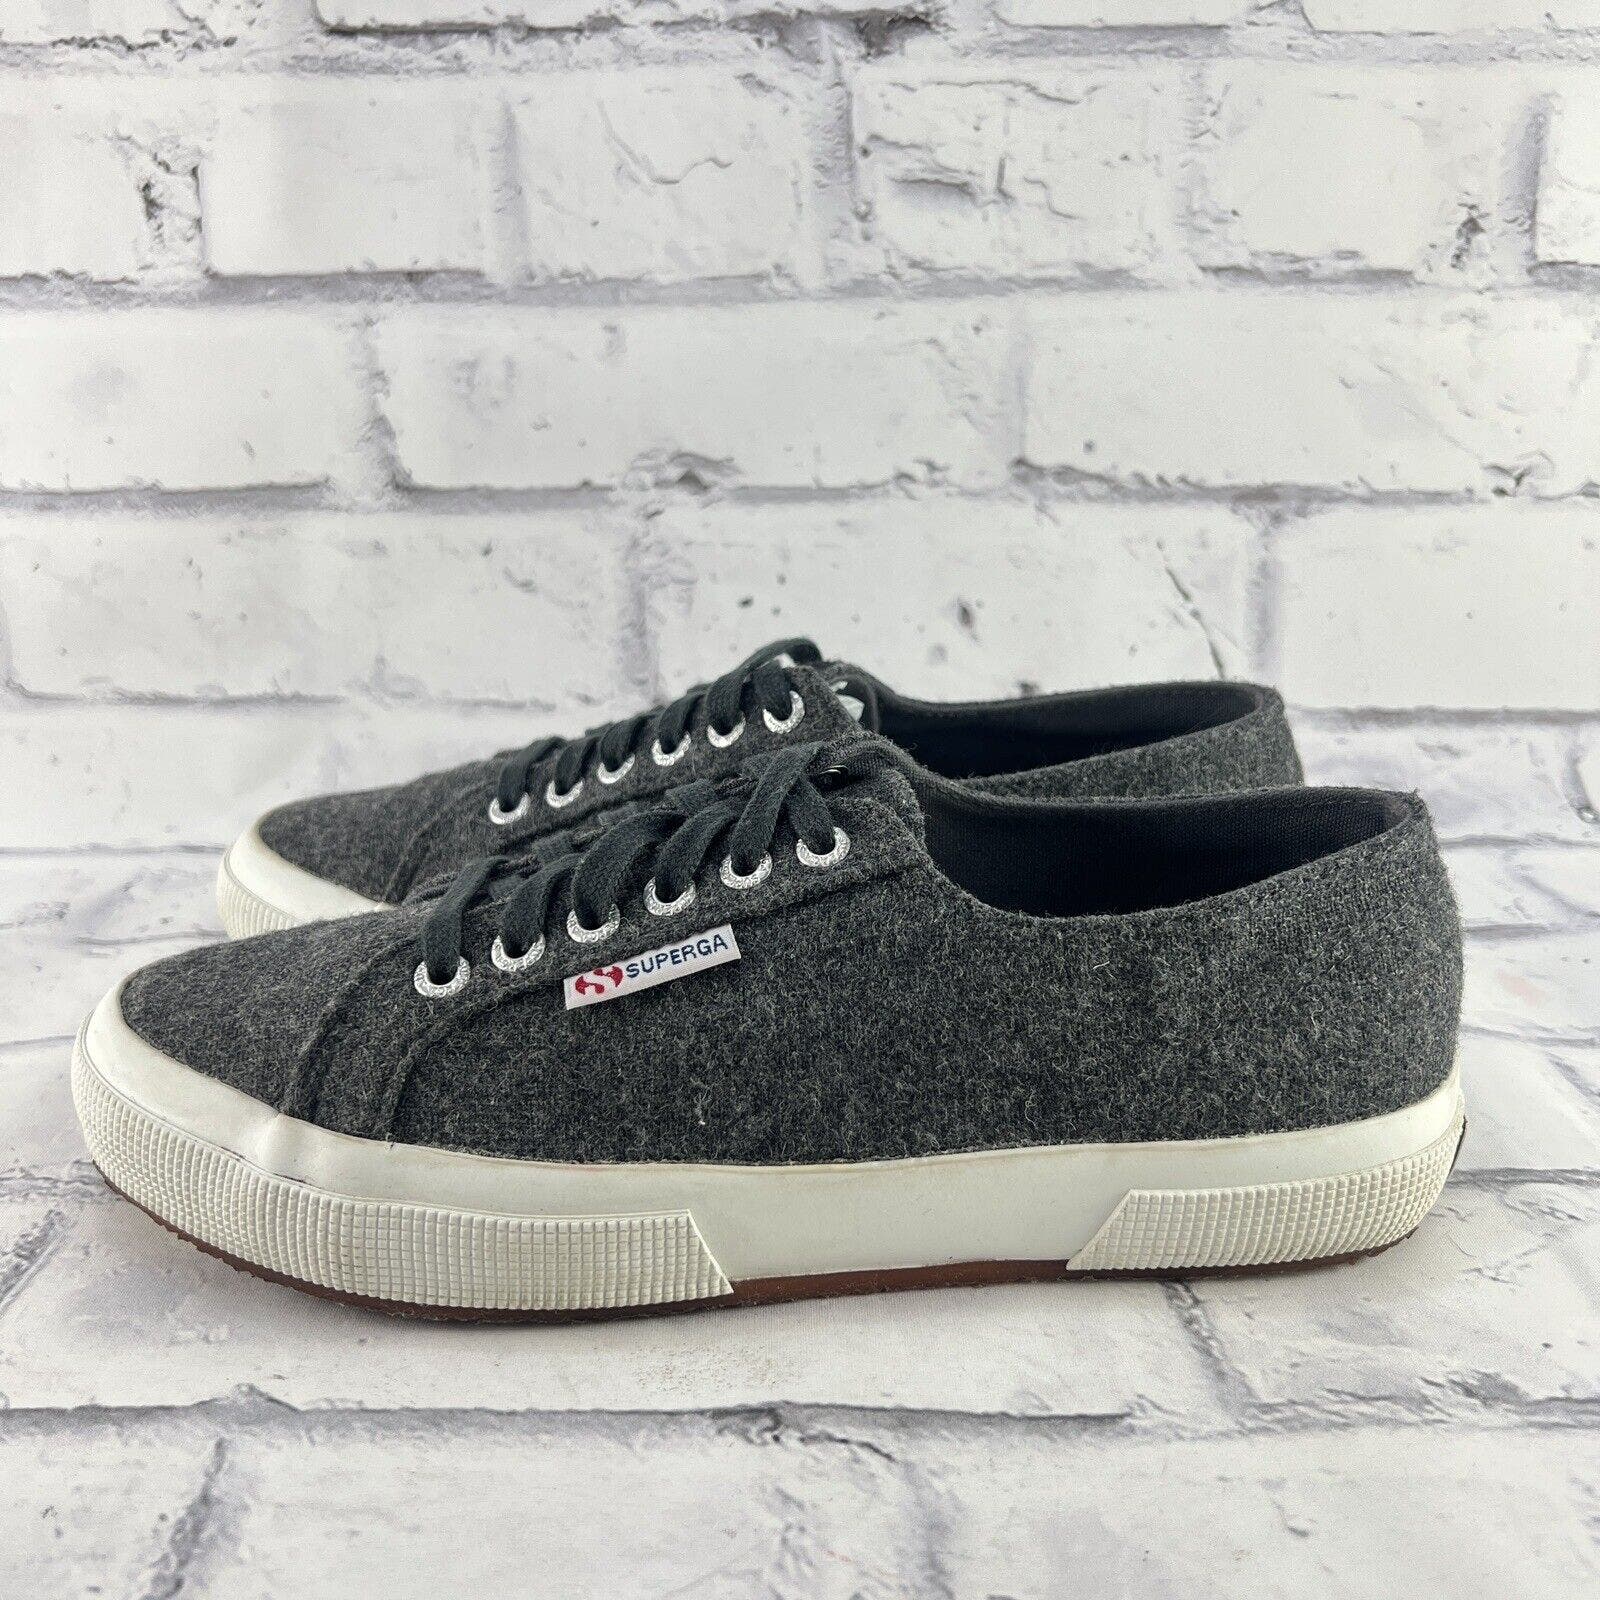 Superga Wool Sneakers Women's 39 (US 8) Gray Lace Up Low Top Casual Shoe